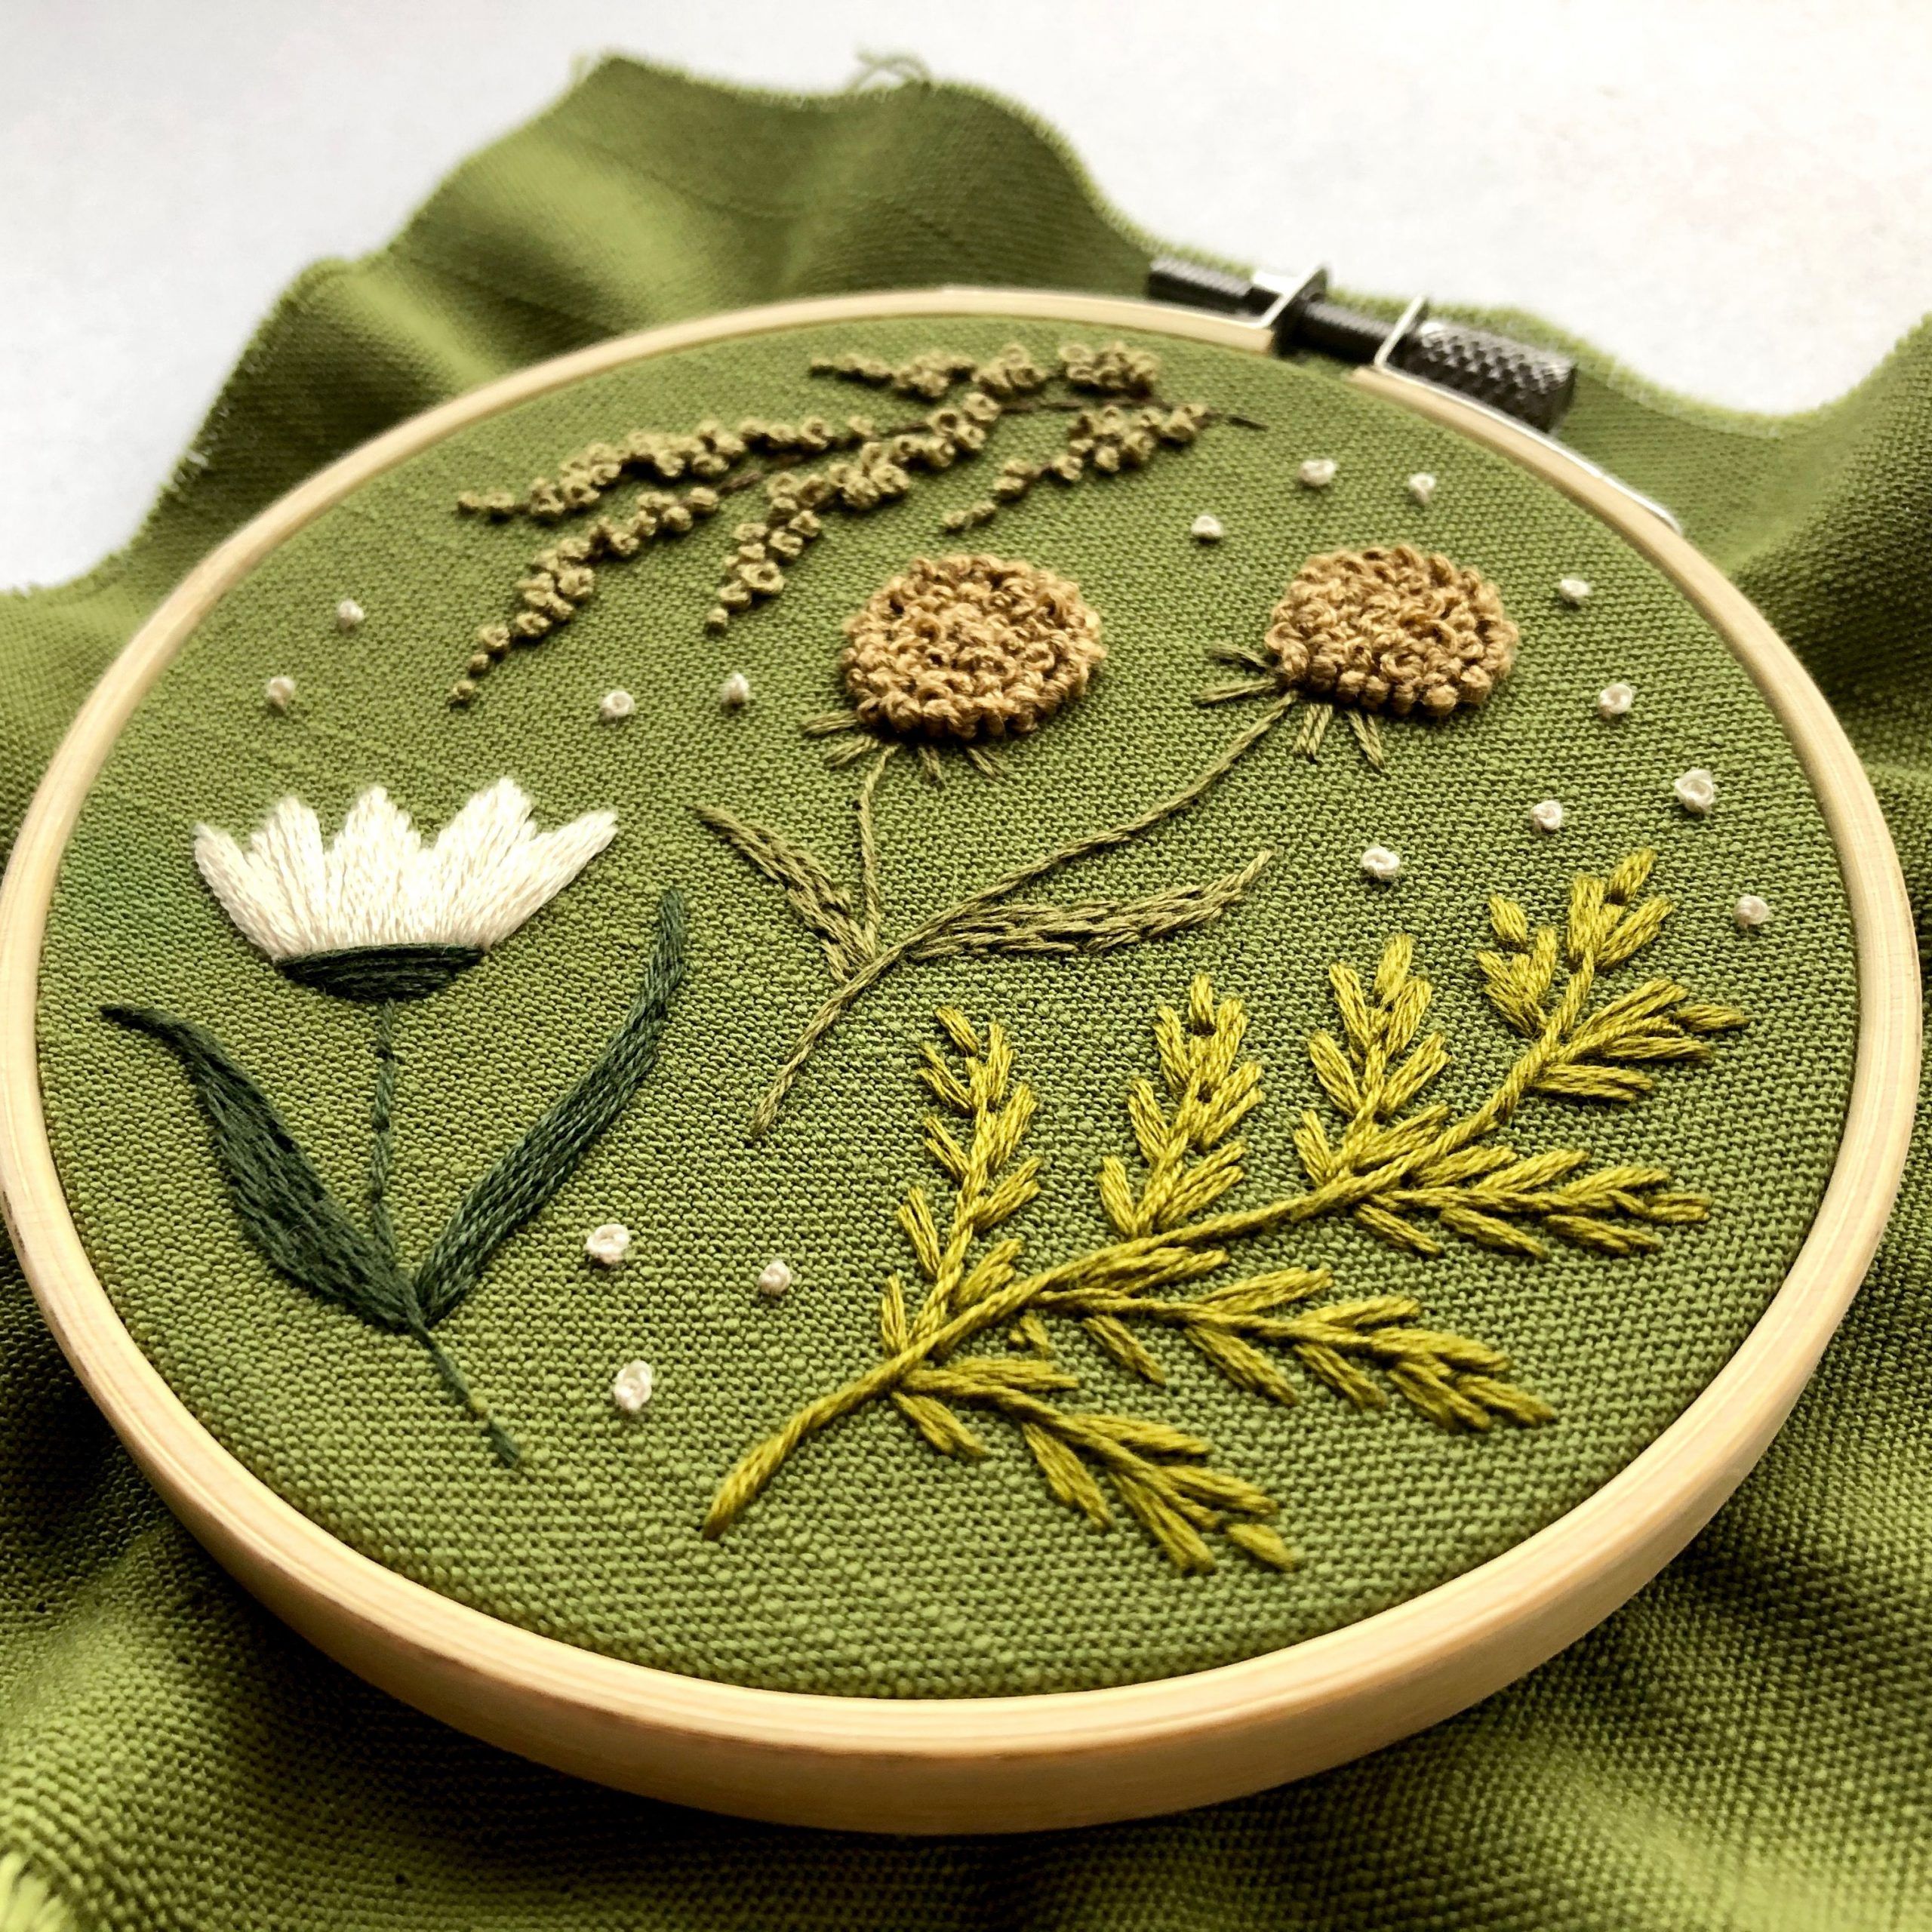 Botanical Hand Embroidery | Embroidery Hoop Art, Unique Within Most Popular Blended Fabric Old Rugged Cross Wall Hangings (View 20 of 20)